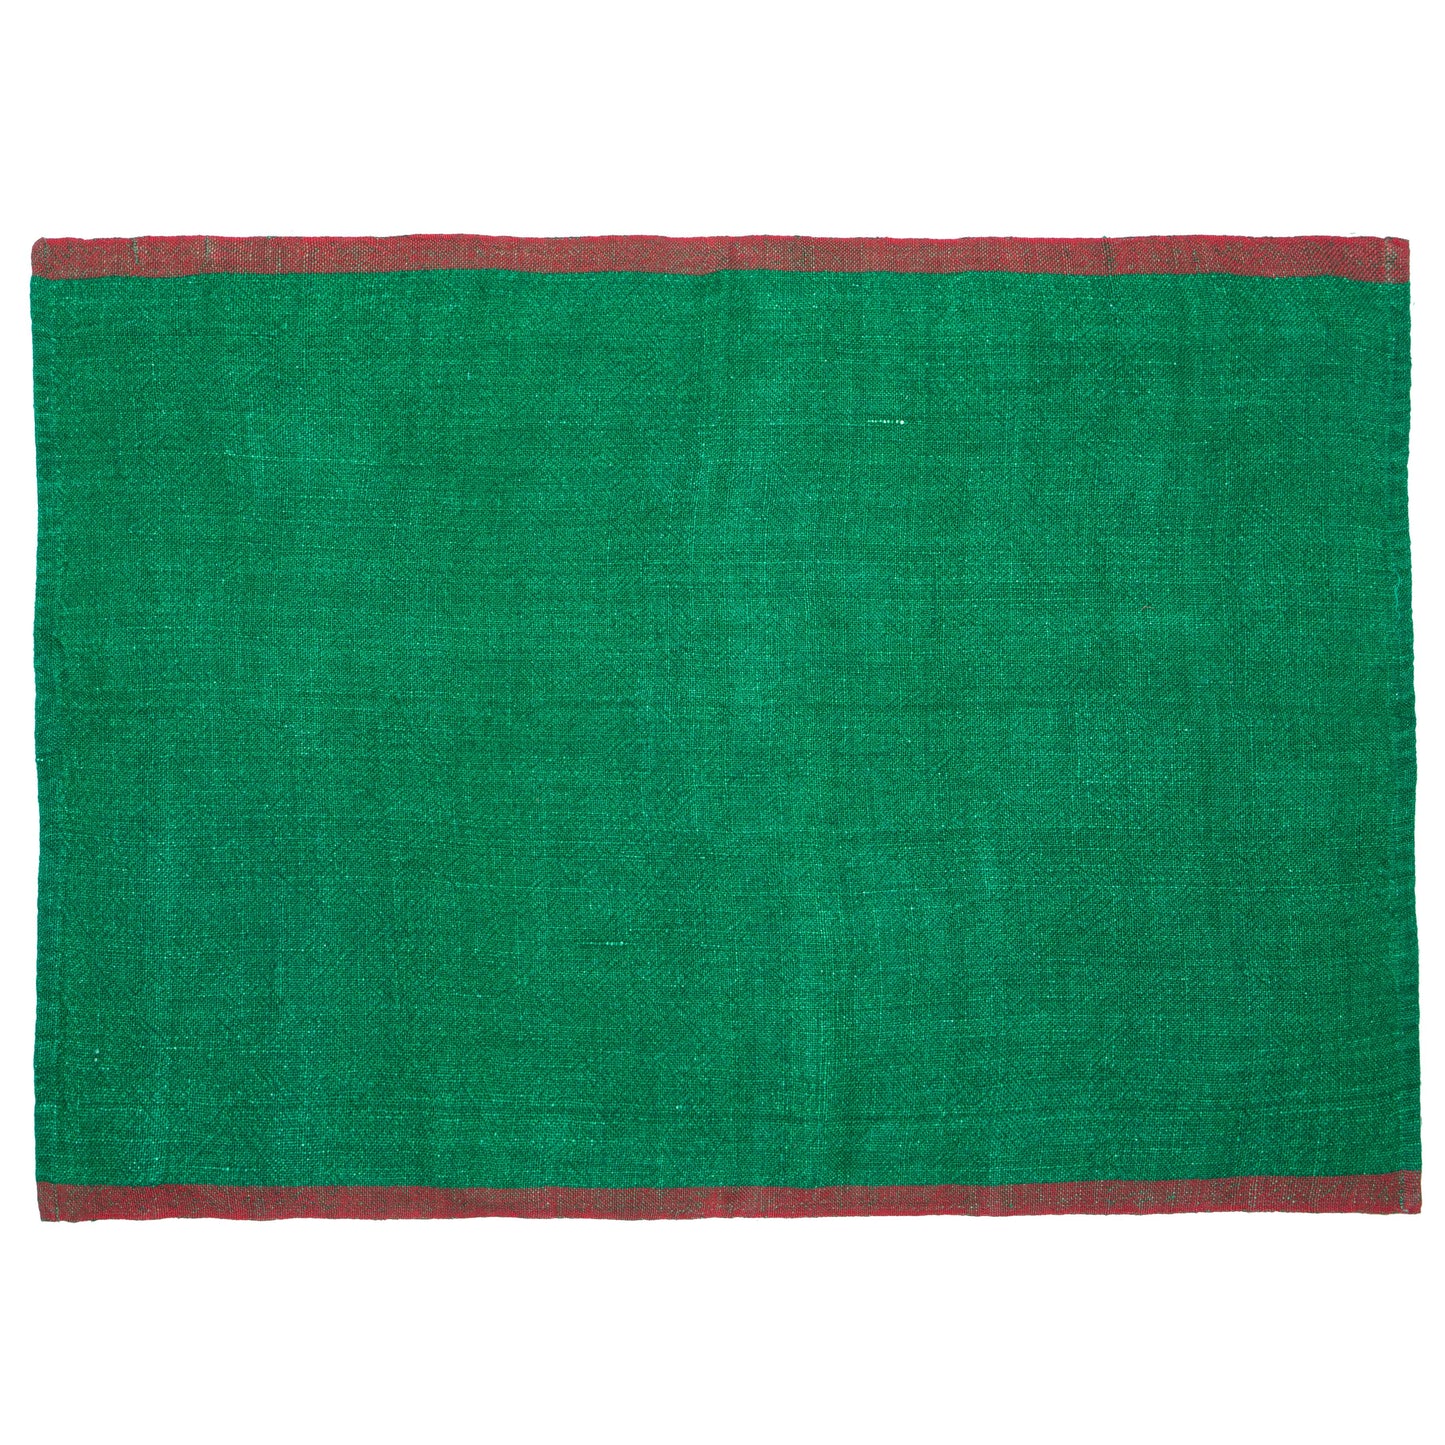 Color Block Green & Red Napkins 20x20 - Set of 4: Green & Red